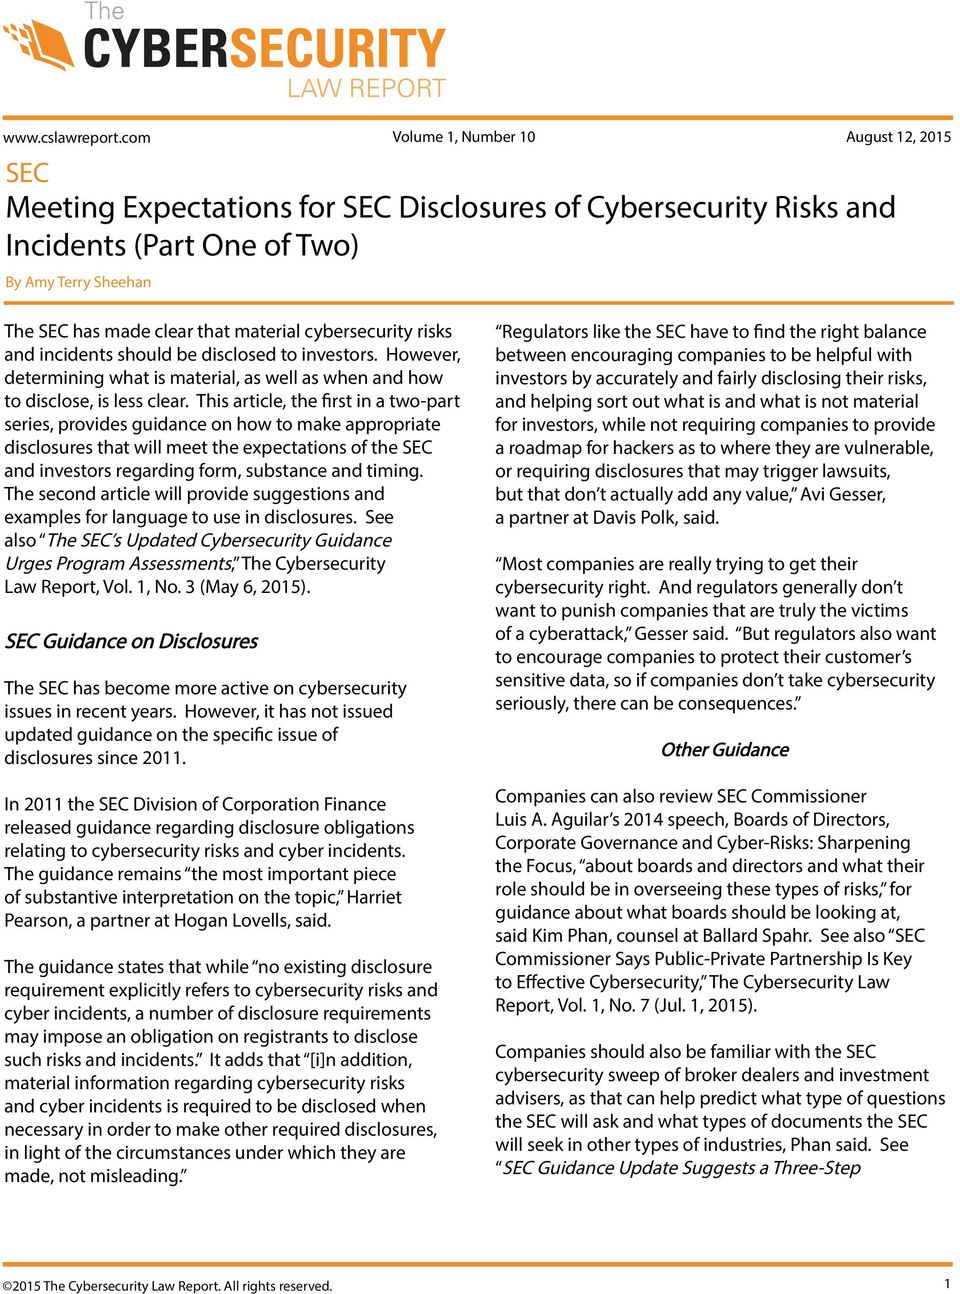 cyber security paper topics